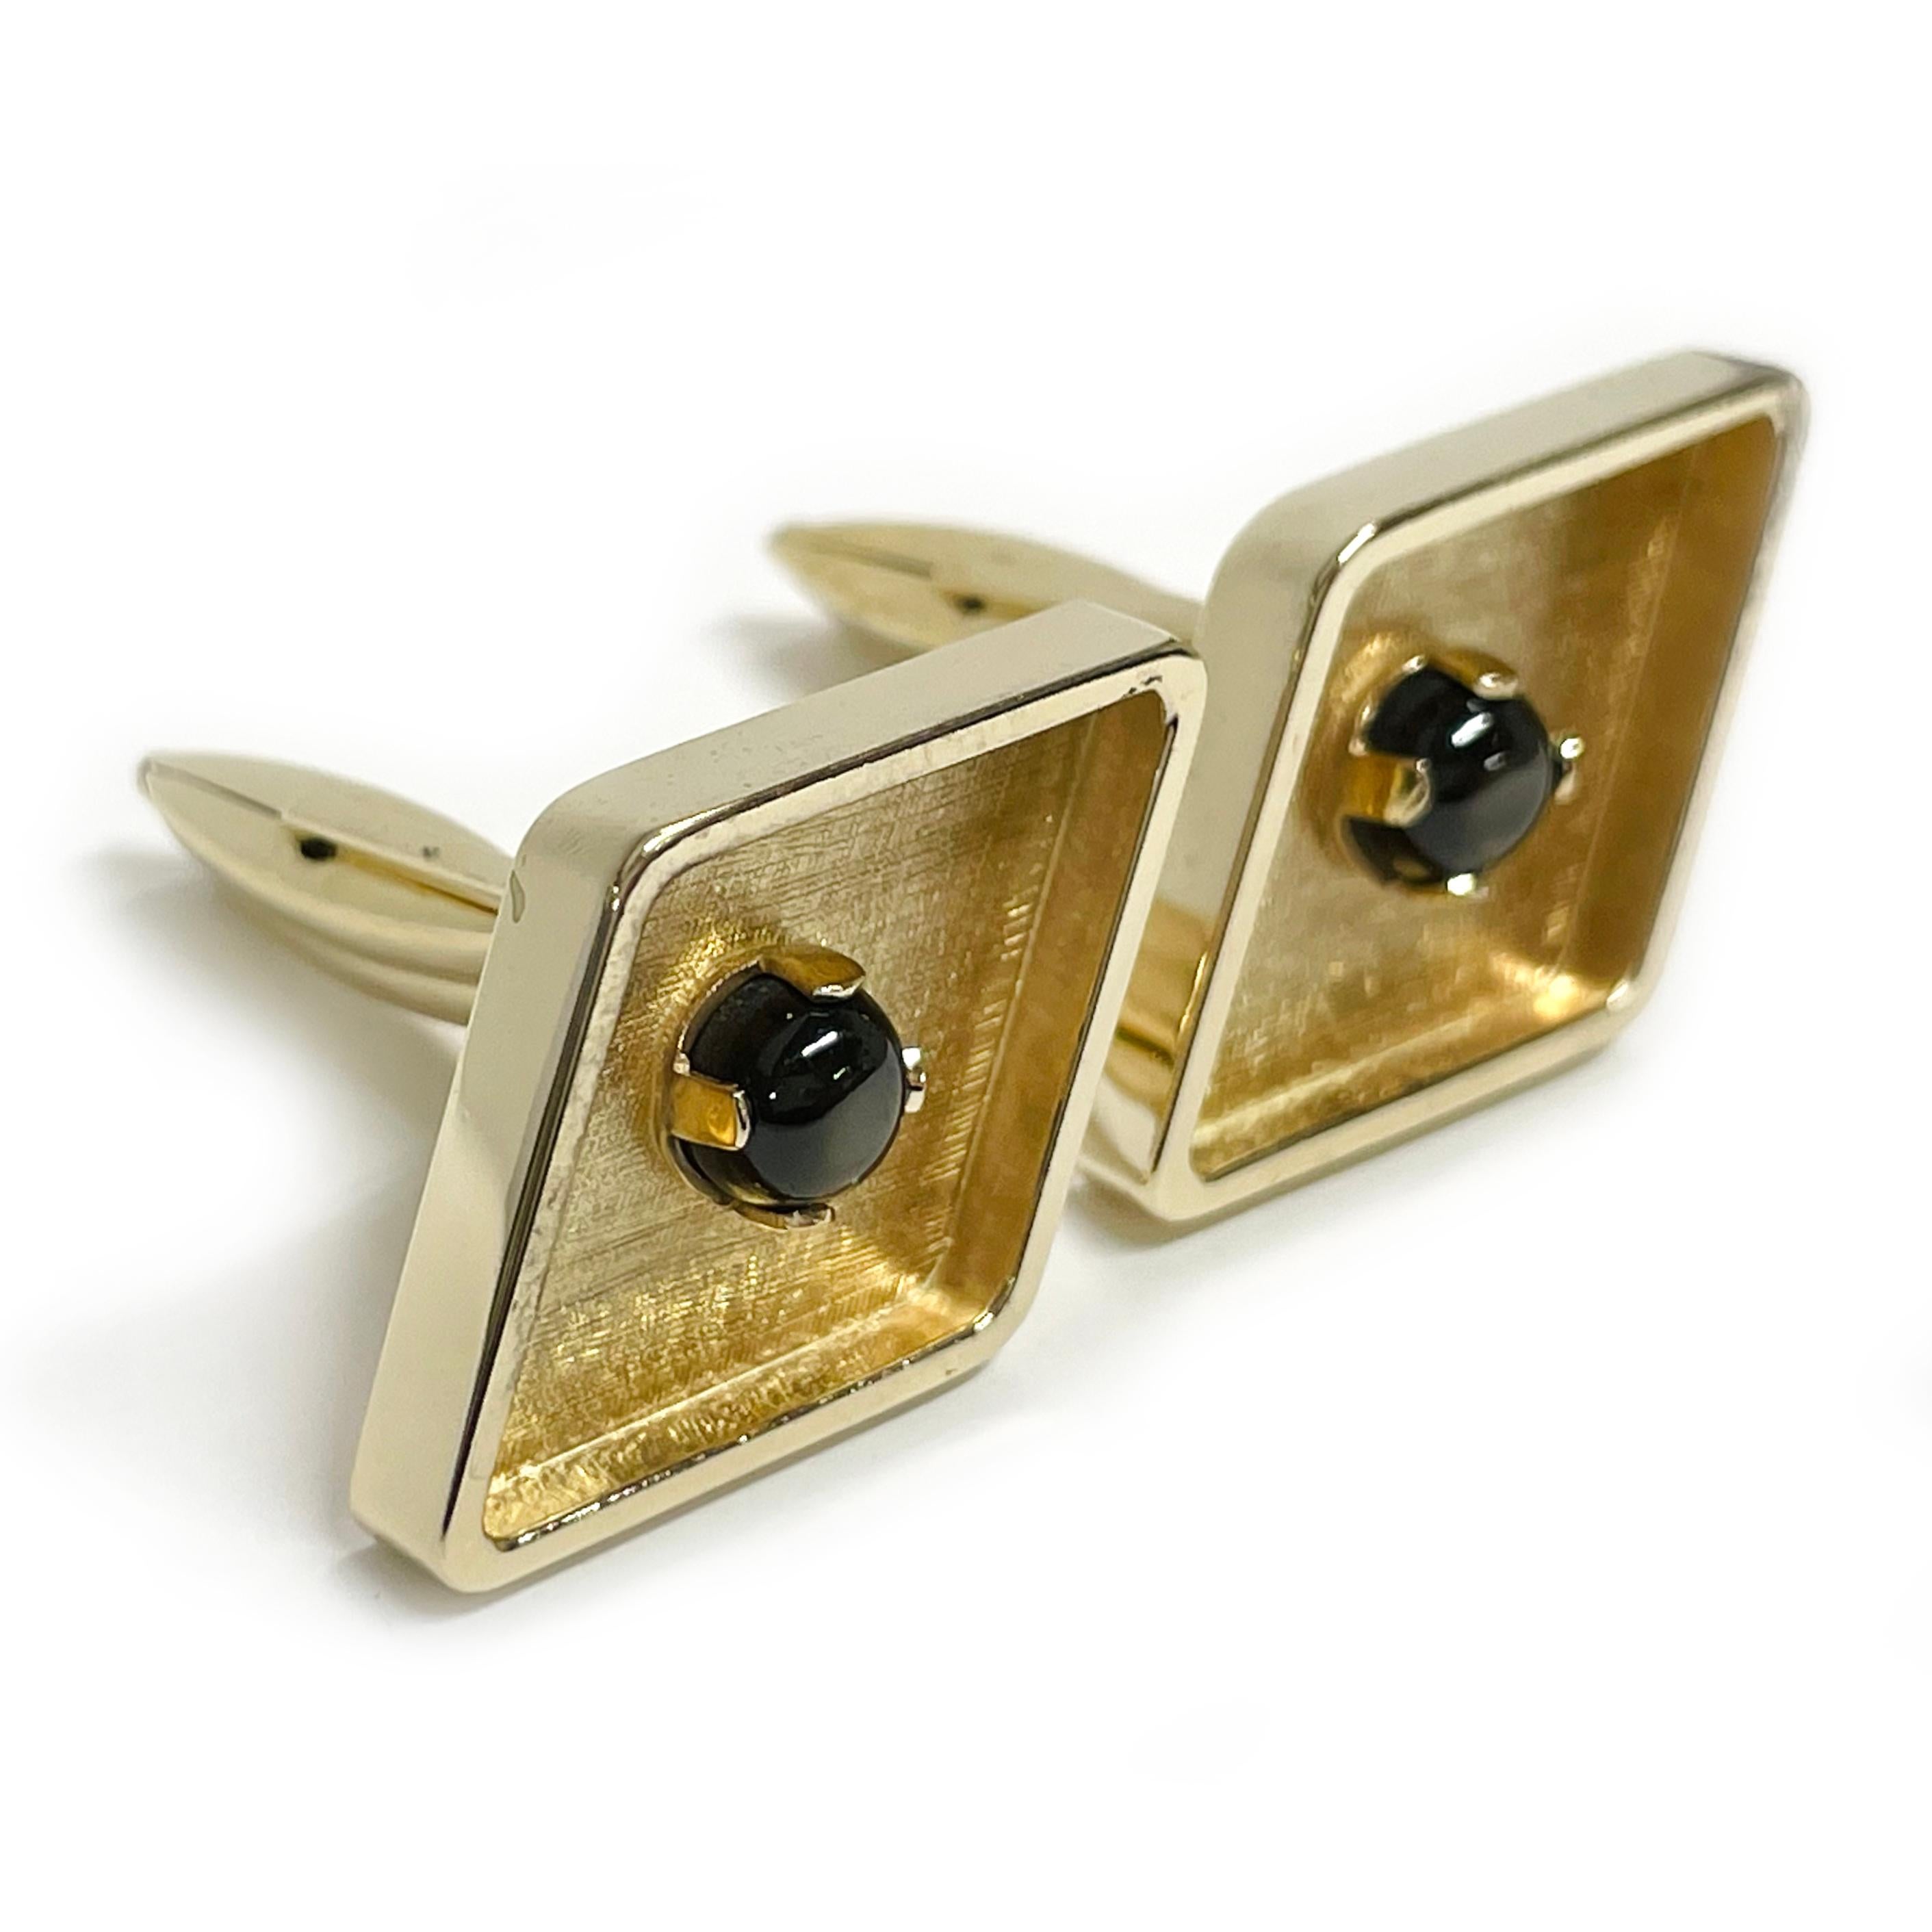 14 Karat Yellow Gold Black Star Sapphire Diamond-Shaped Gold Cufflinks. The cufflinks are diamond-shaped with rounded edges and a 5.6mm black star sapphire cabochon prong-set at in the center. The inside bezel front of the cufflinks has a Florentine